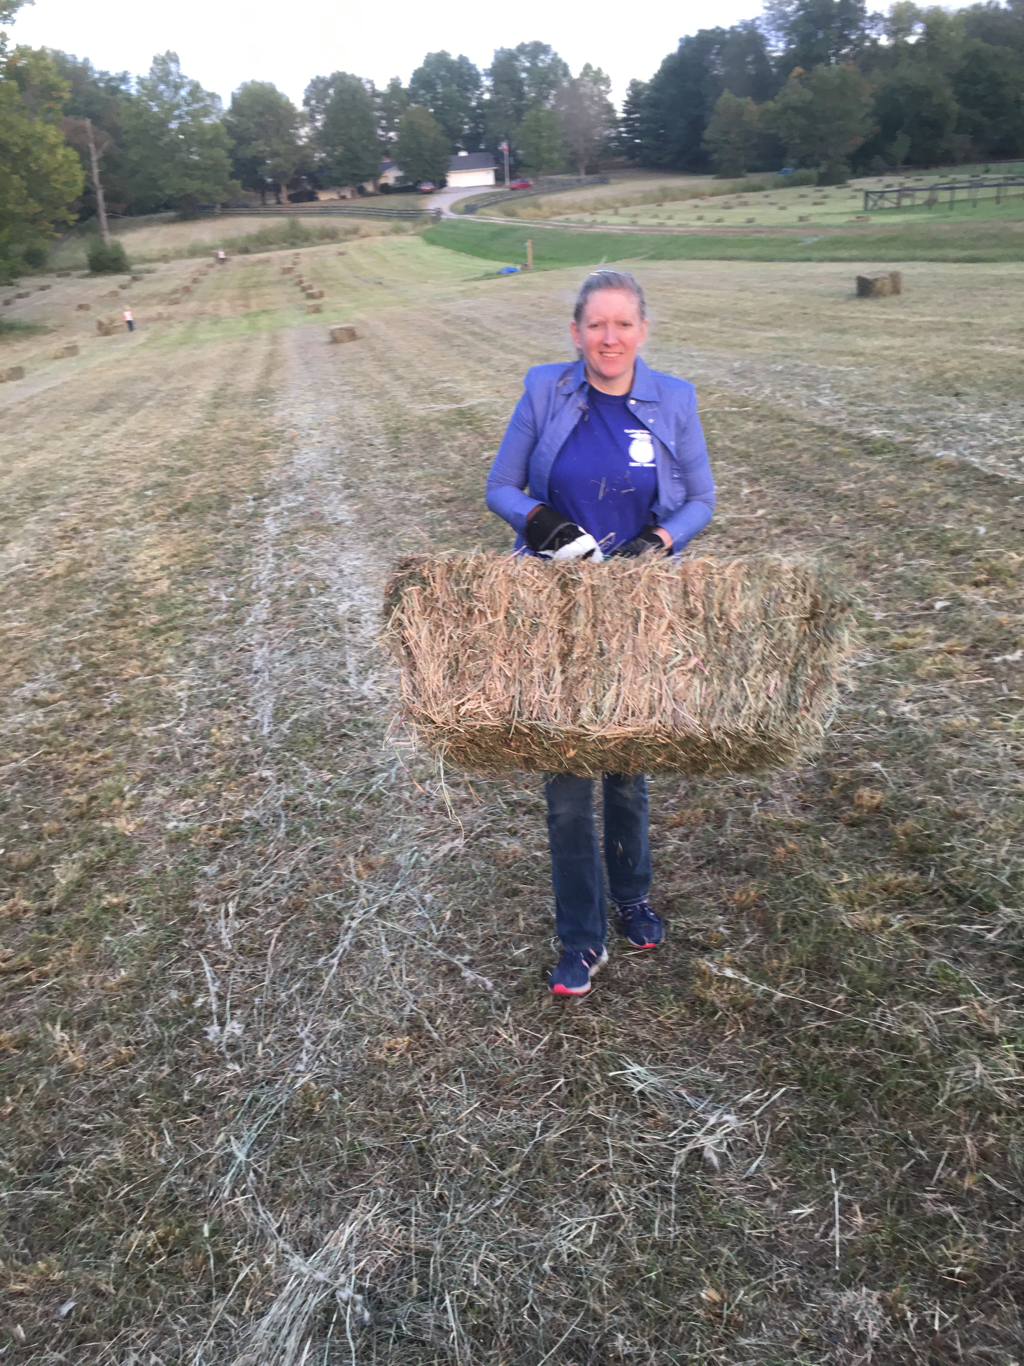 Mom stacking hay bales too.